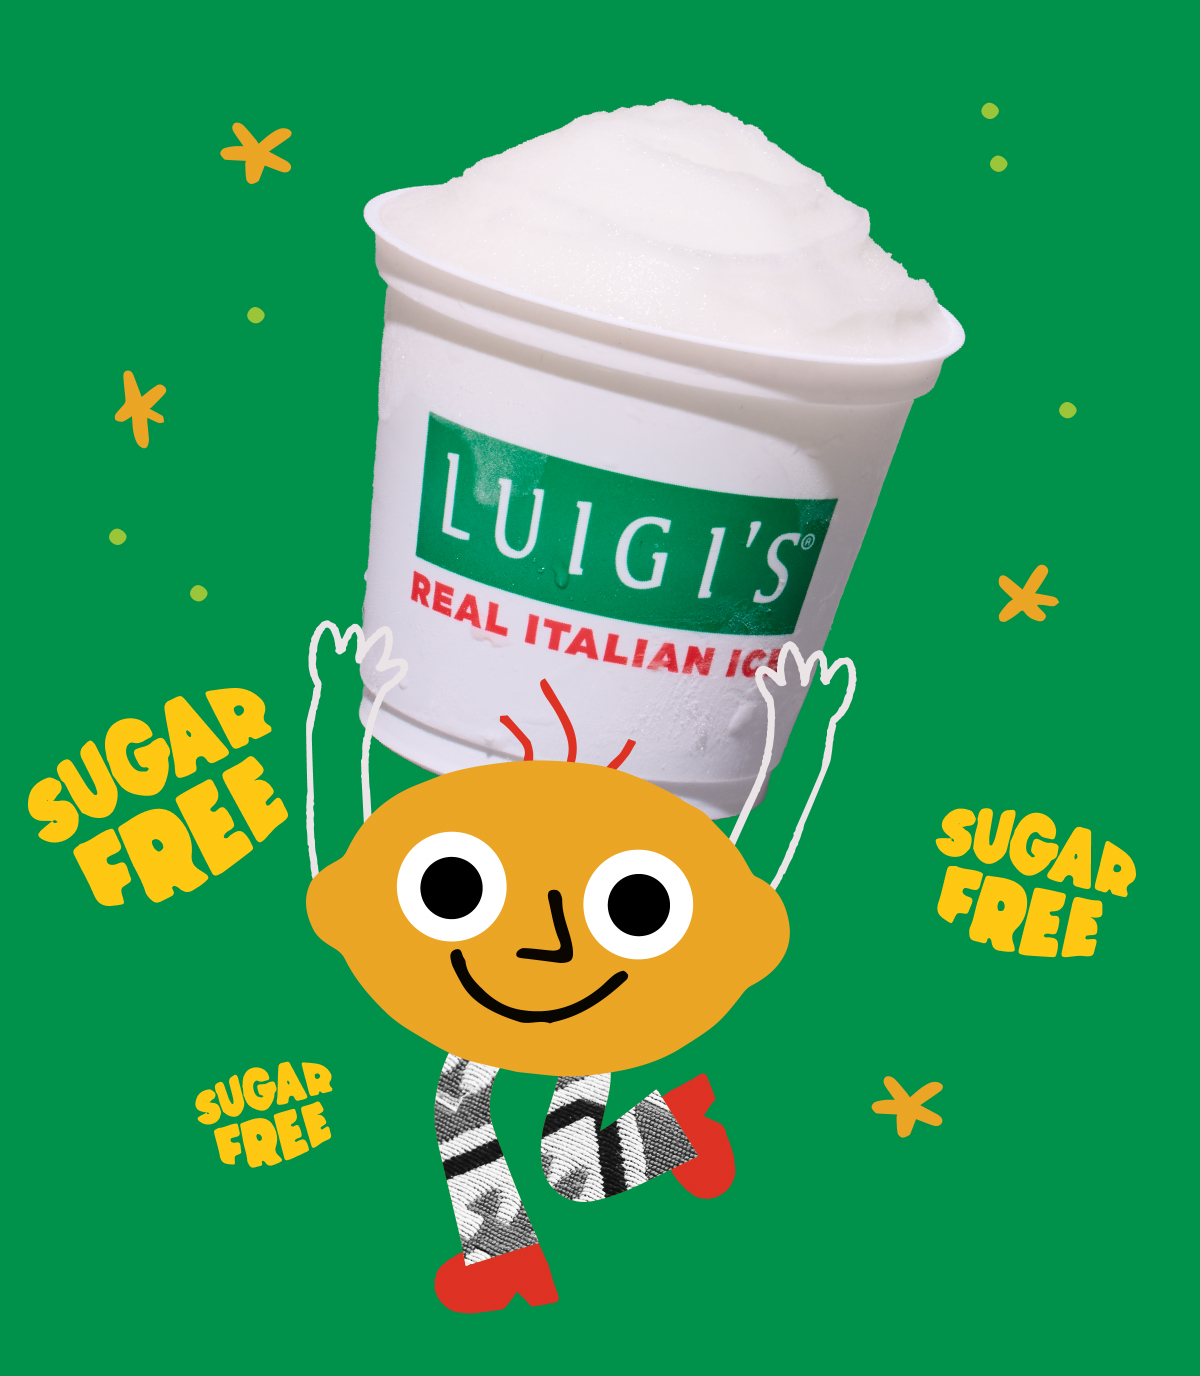 Graphic of groovy lemon character dancing with a cup of sugar-free lemon LUIGI'S Real Italian Ice. Background is a green color with yellow stars. Sugar free is written three times in yellow bubbly letters.